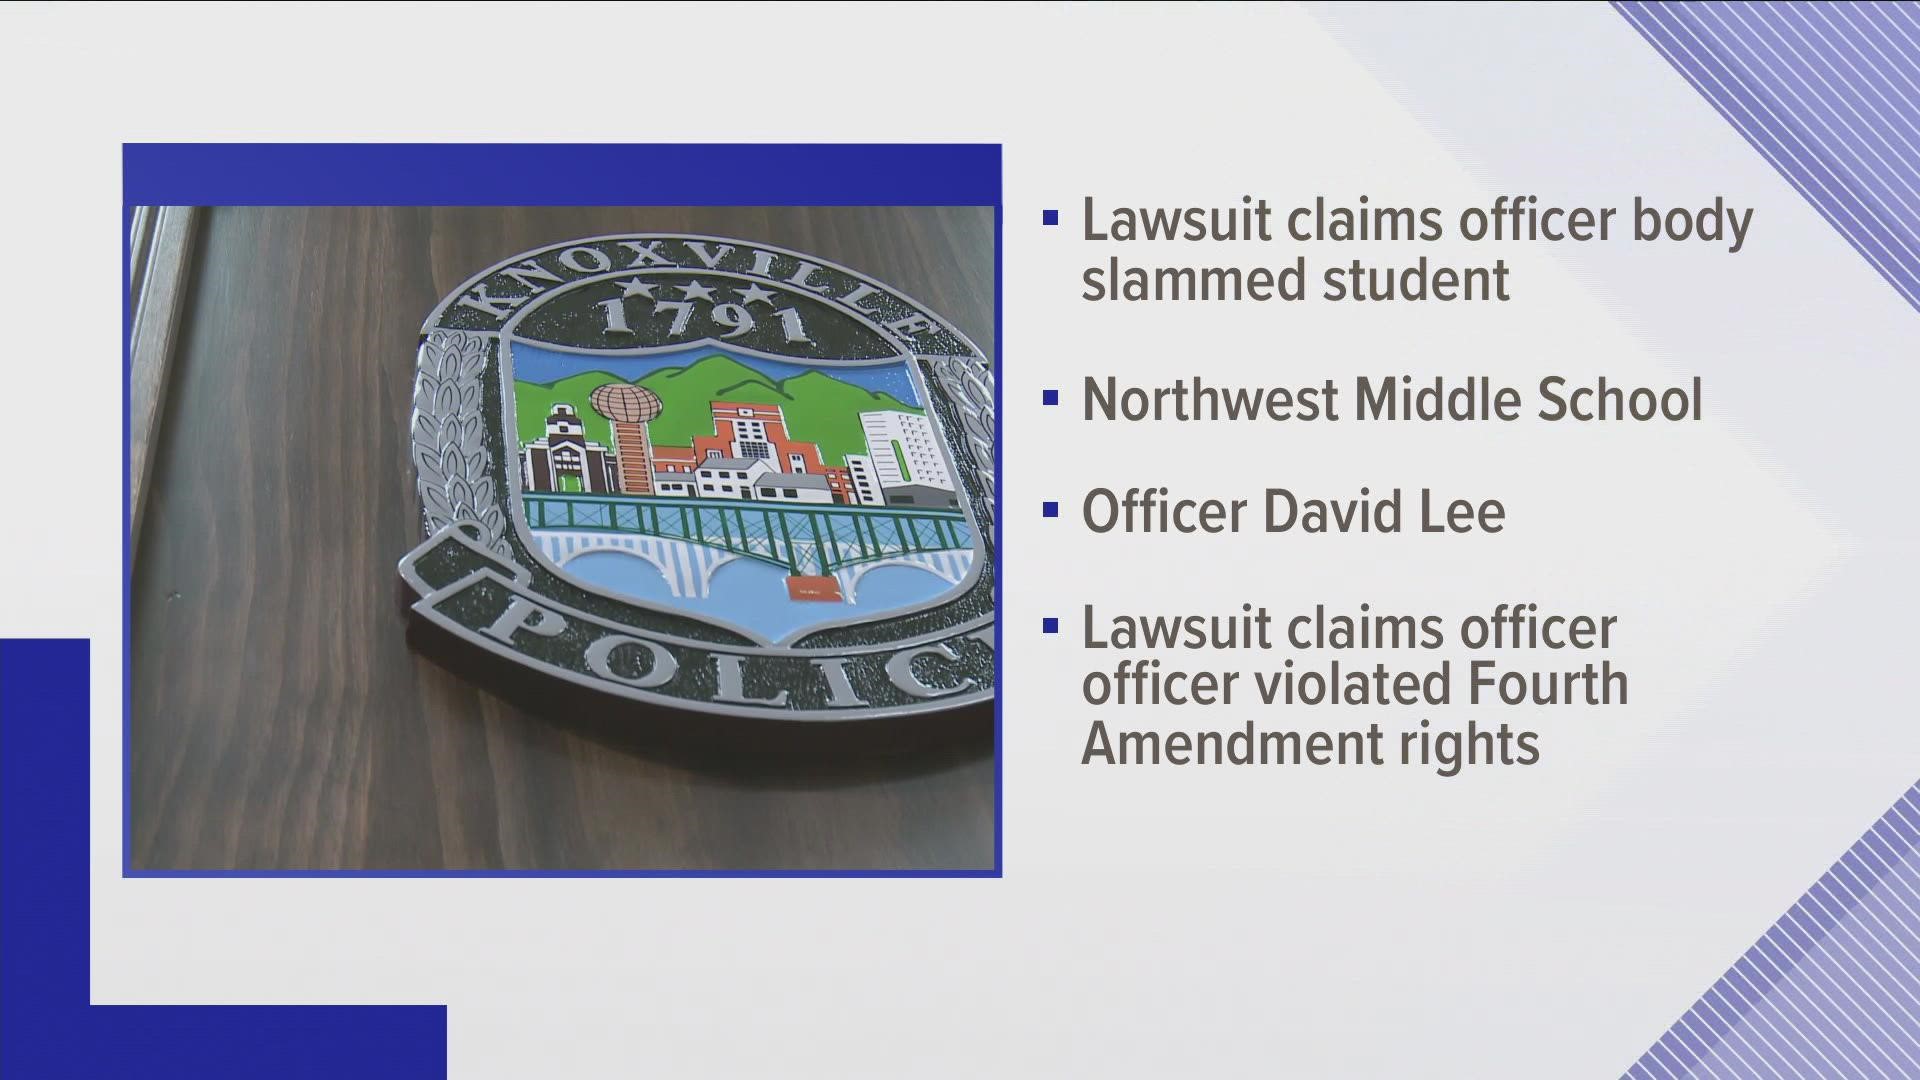 The lawsuit said that Officer David Lee illegally handcuffed and searched an 8th-grade student, and also injured him by slamming him down on a table.